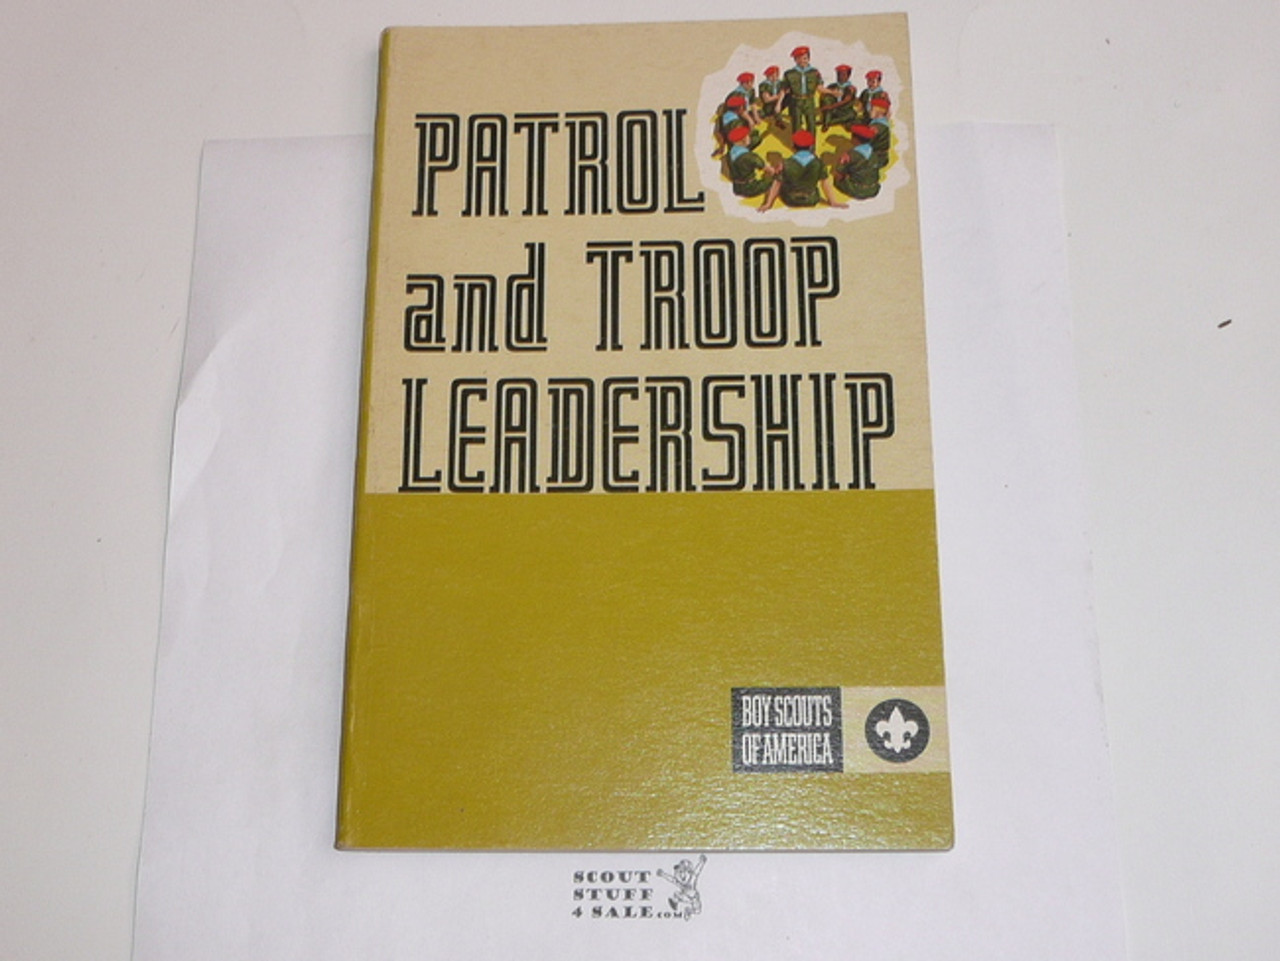 1972 Patrol and Troop Leadership Handbook, Fourth Edition, Second Printing, MINT Condition